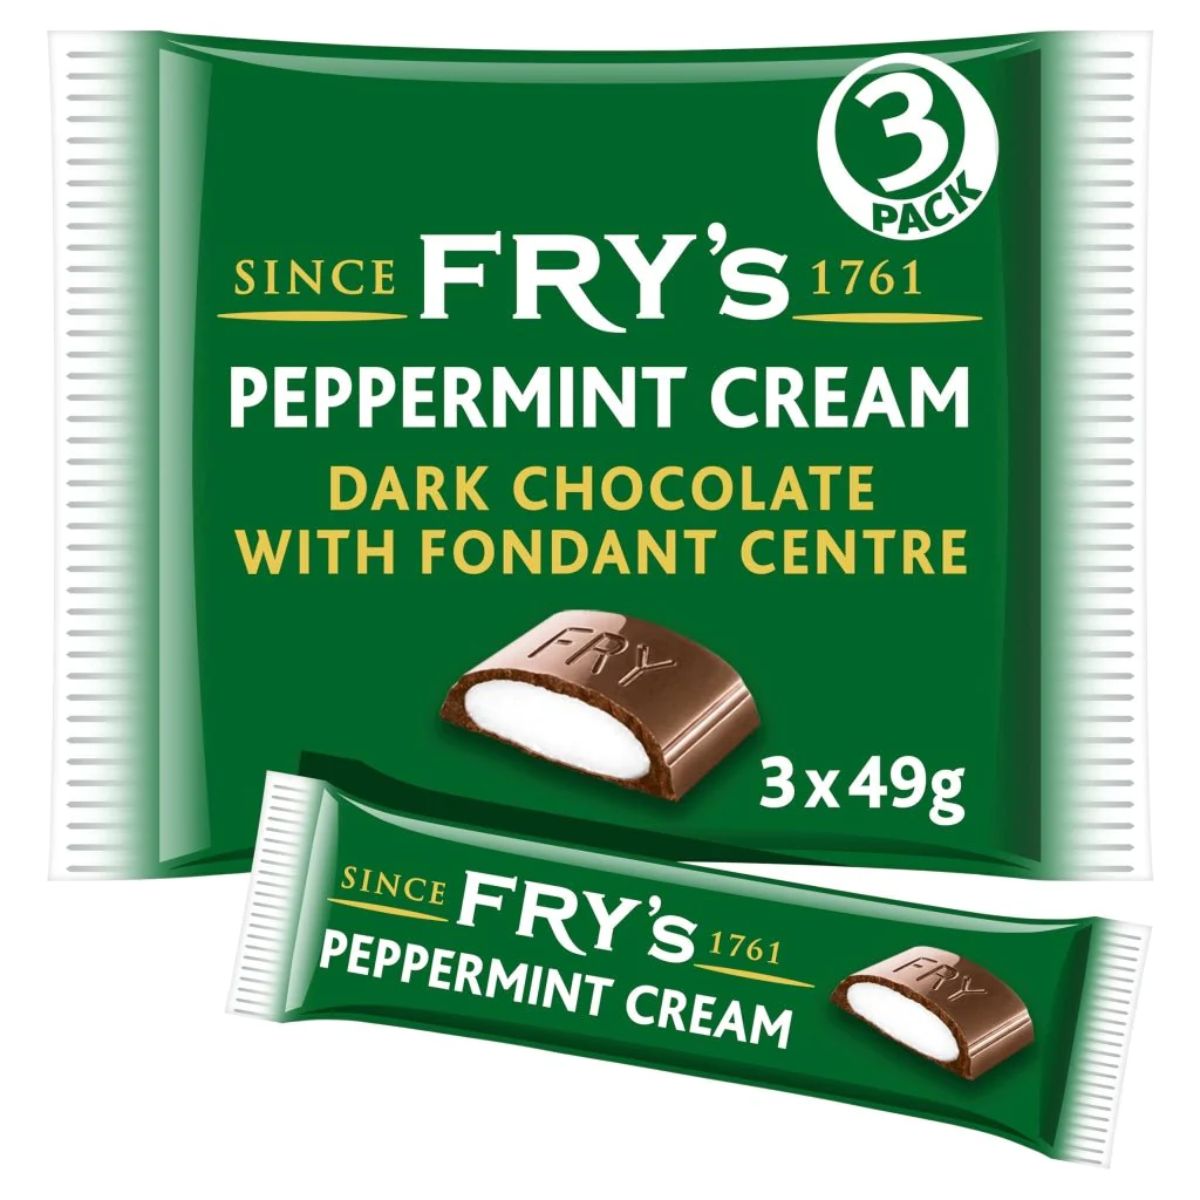 Fry's - The Kings Coronation Peppermint Cream - 3x49g dark chocolate with fondant centre.